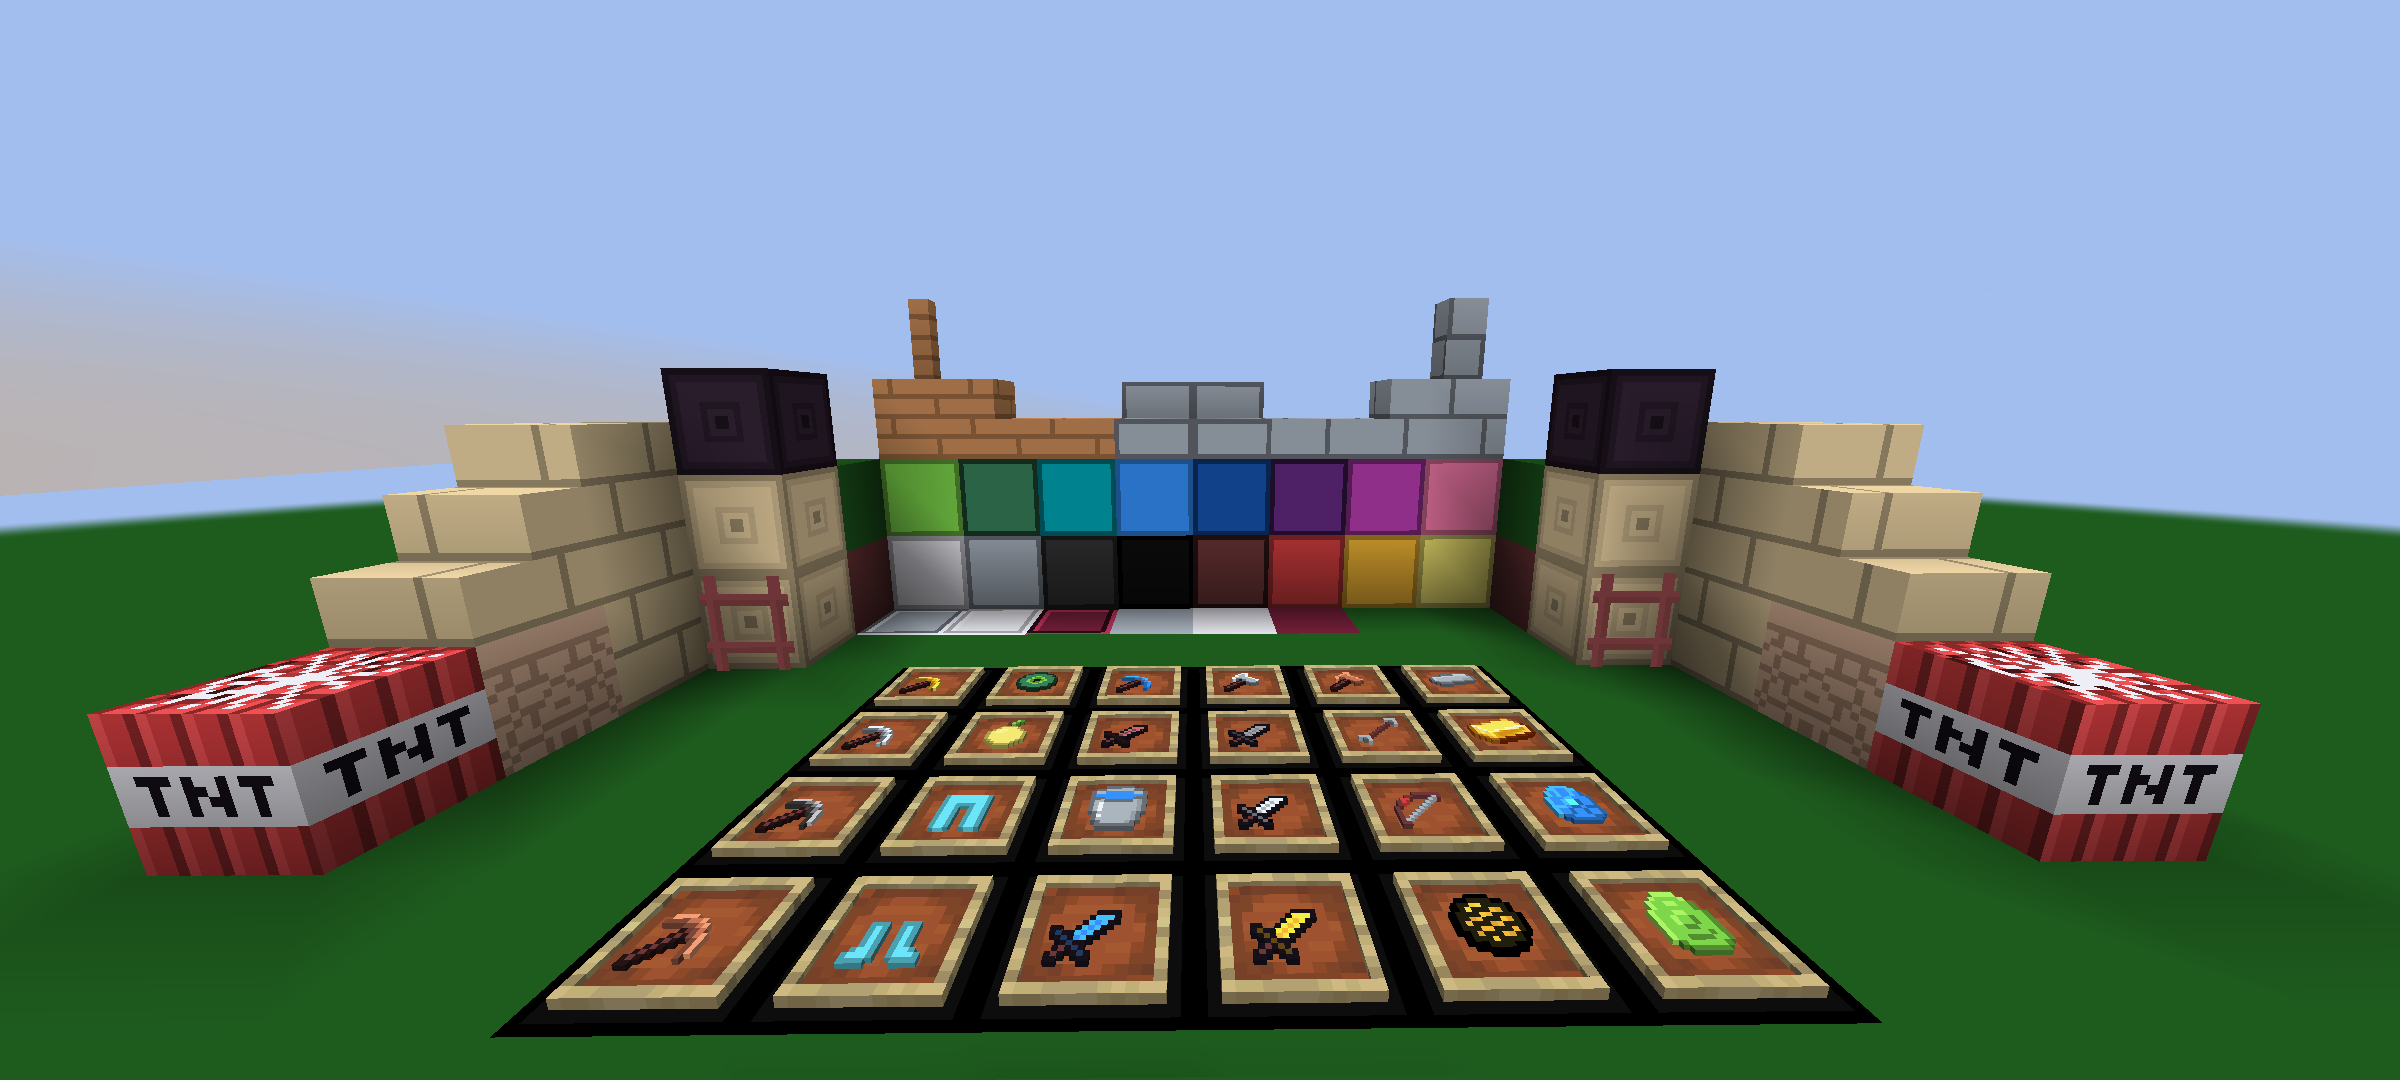 All blocks and items